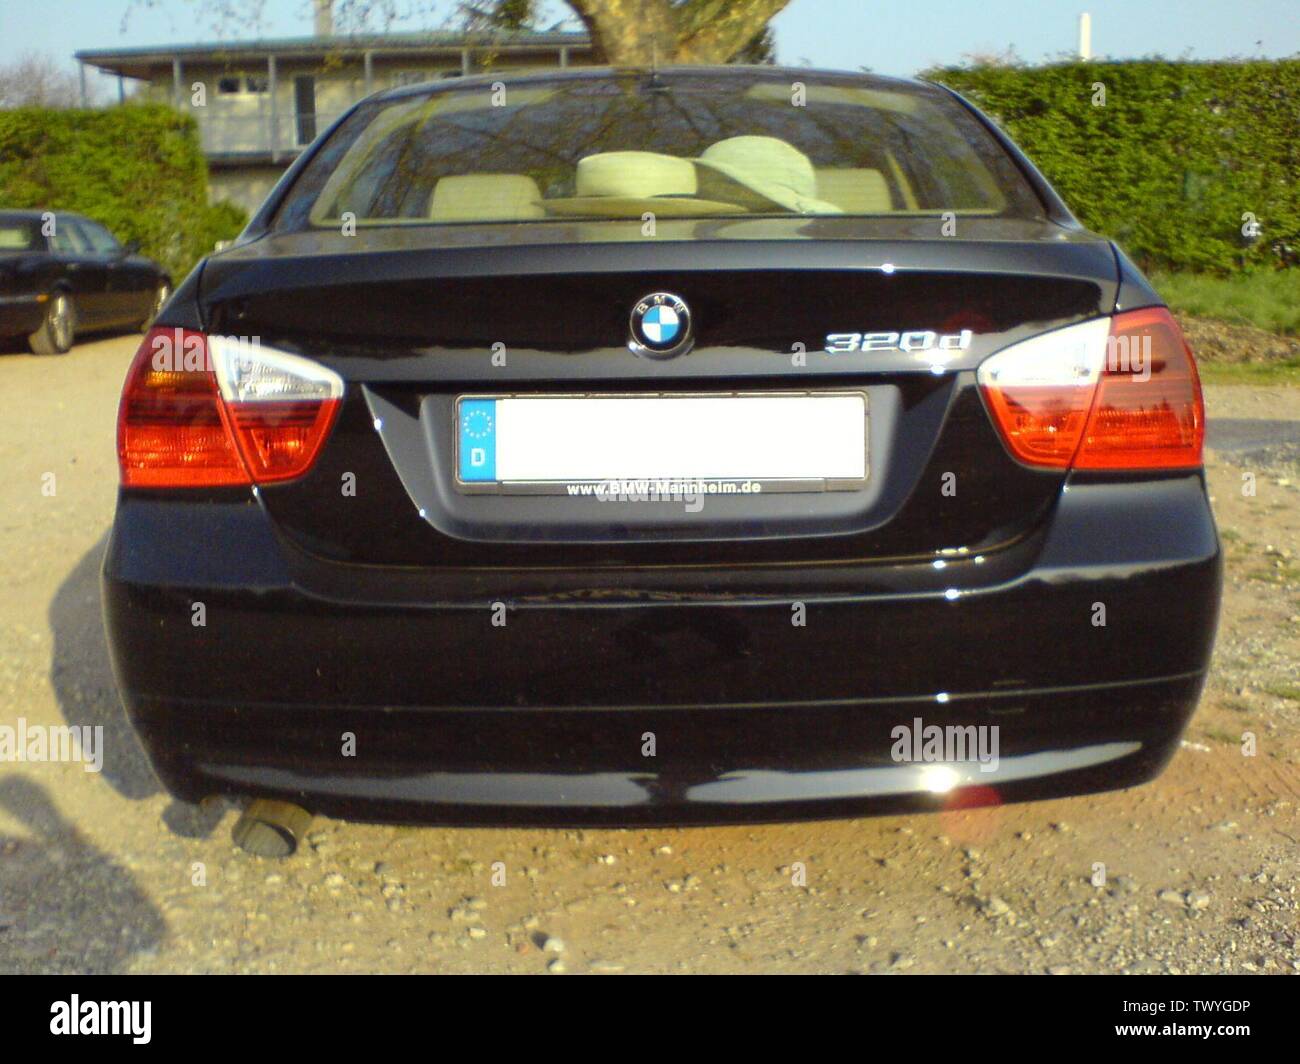 Oposición Ropa recluta BMW E90 320d; 14 July 2007; Self-photographed; Ma92 Stock Photo - Alamy